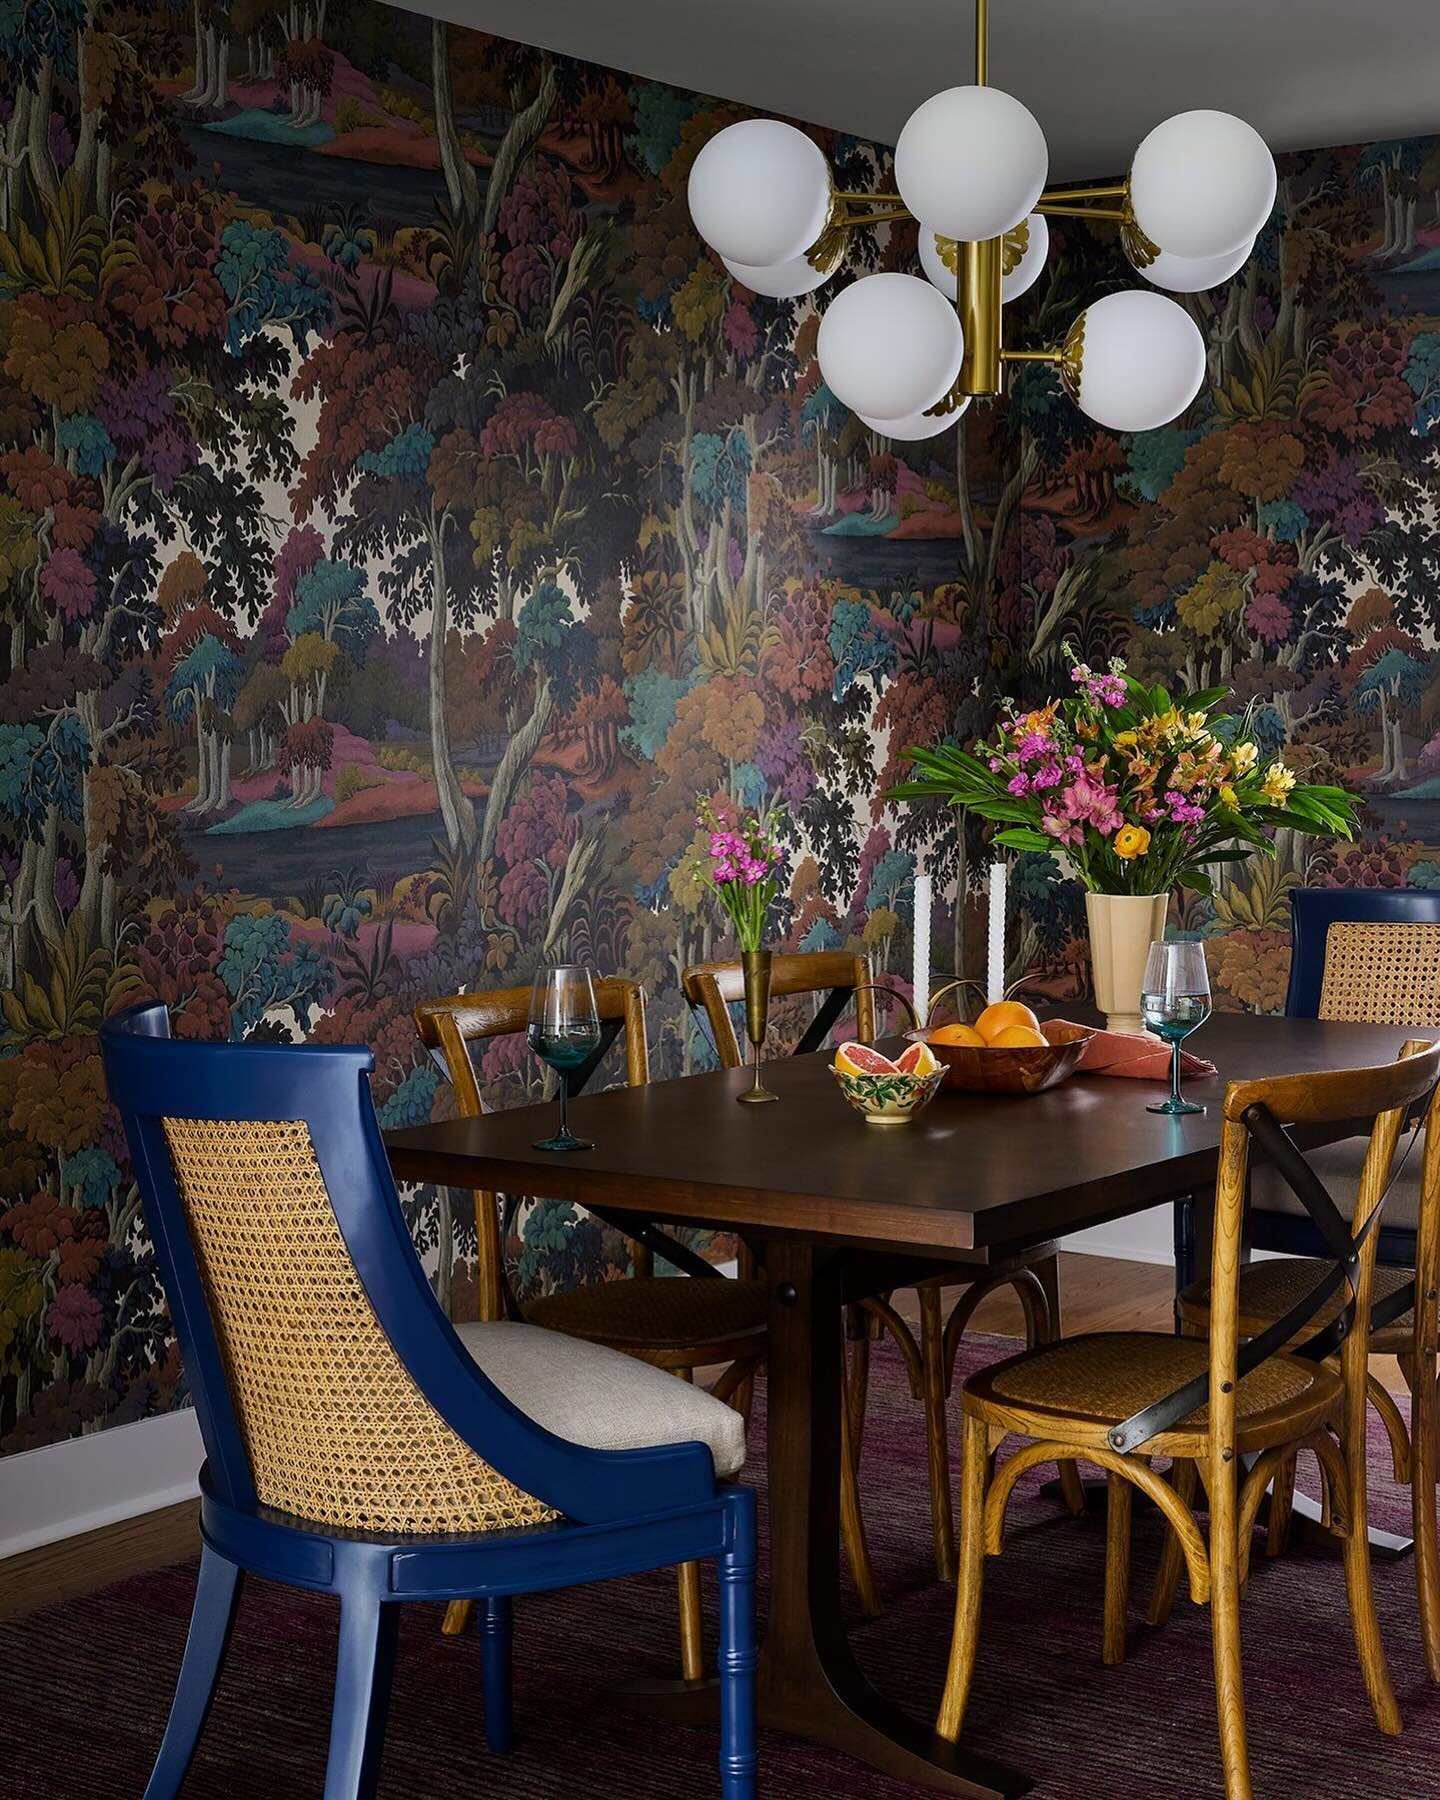 When we present a design concept we provide options for our clients to select from. More often than not, we have a secret or not-so-secret favorite piece or scheme. Spoiler alert: this dining fave was this @houseofhackney paper, Plantasia in Prism! O